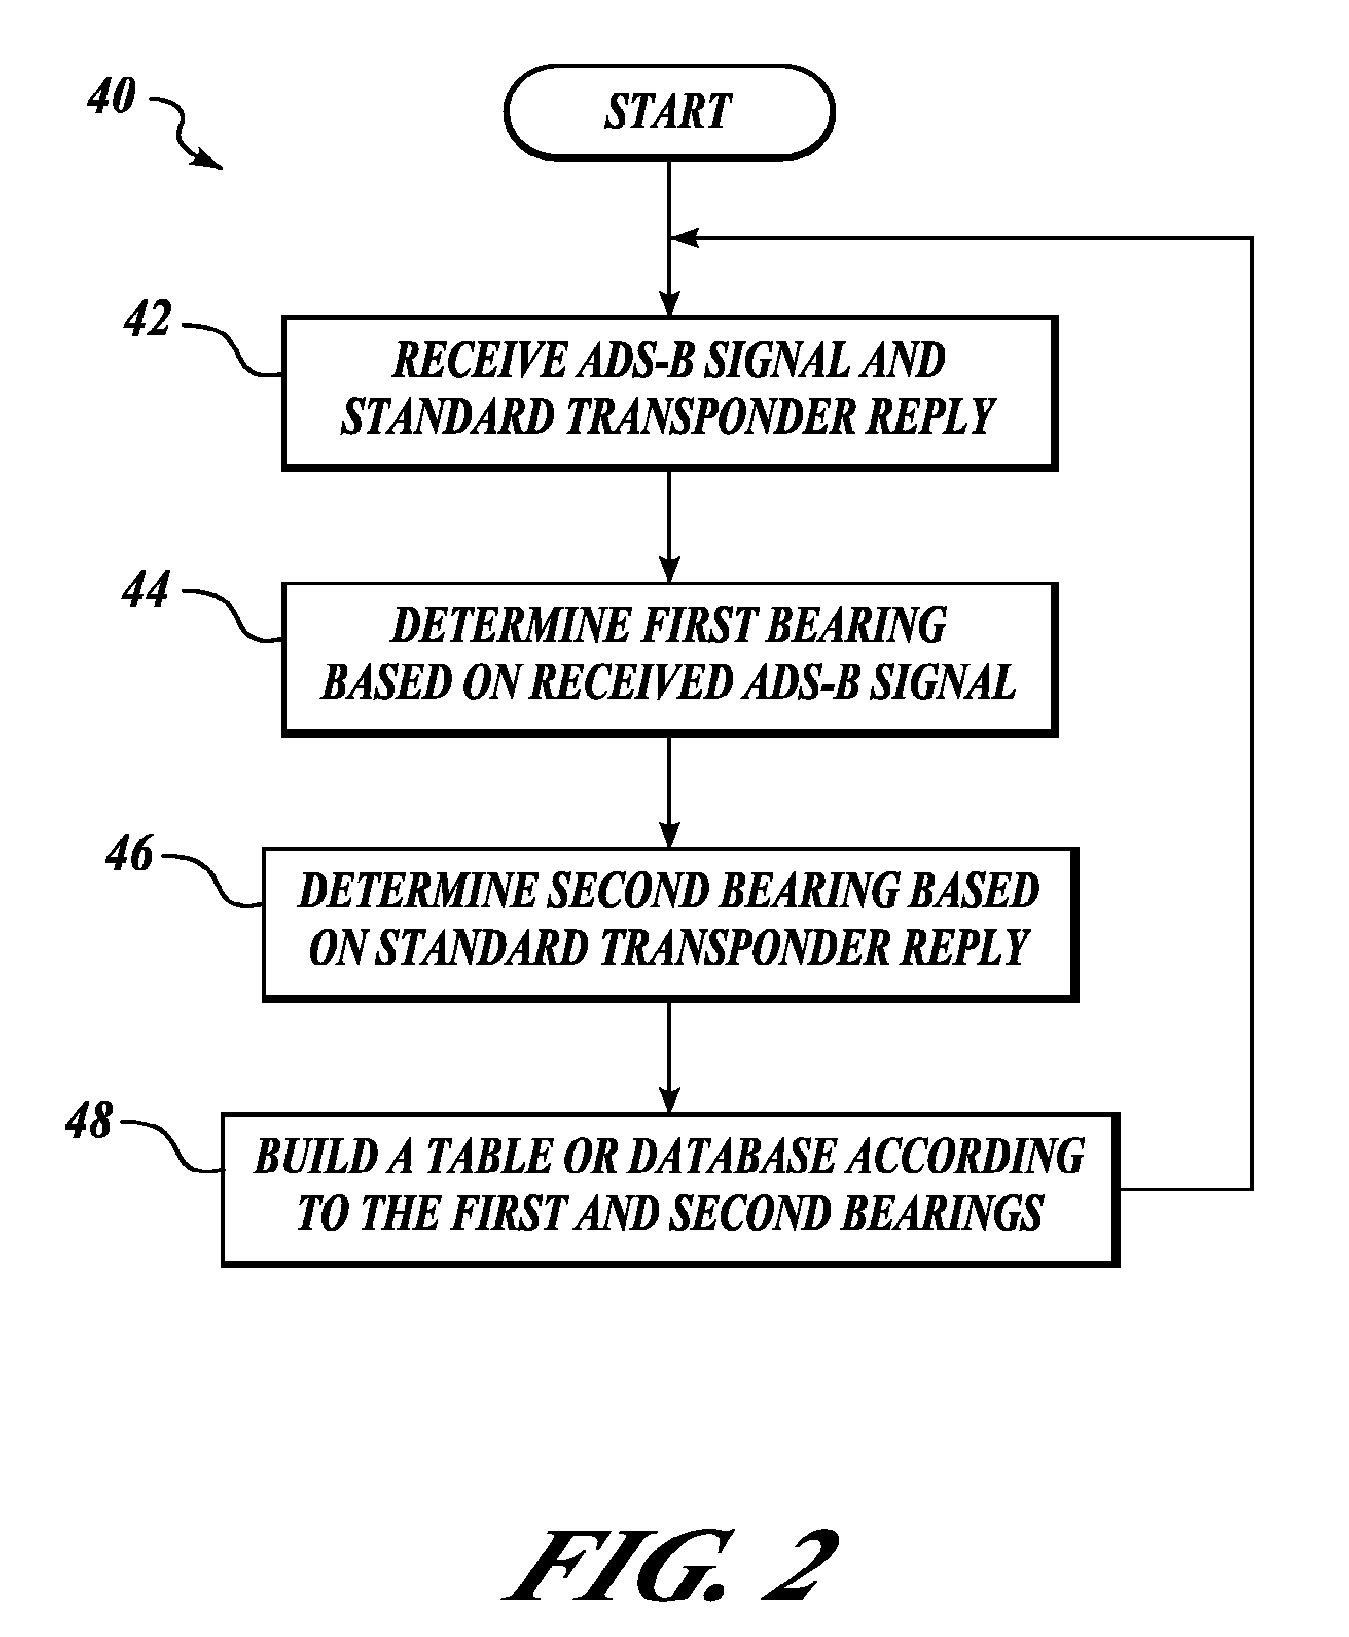 Methods and systems of determining bearing when ads-b data is unavailable